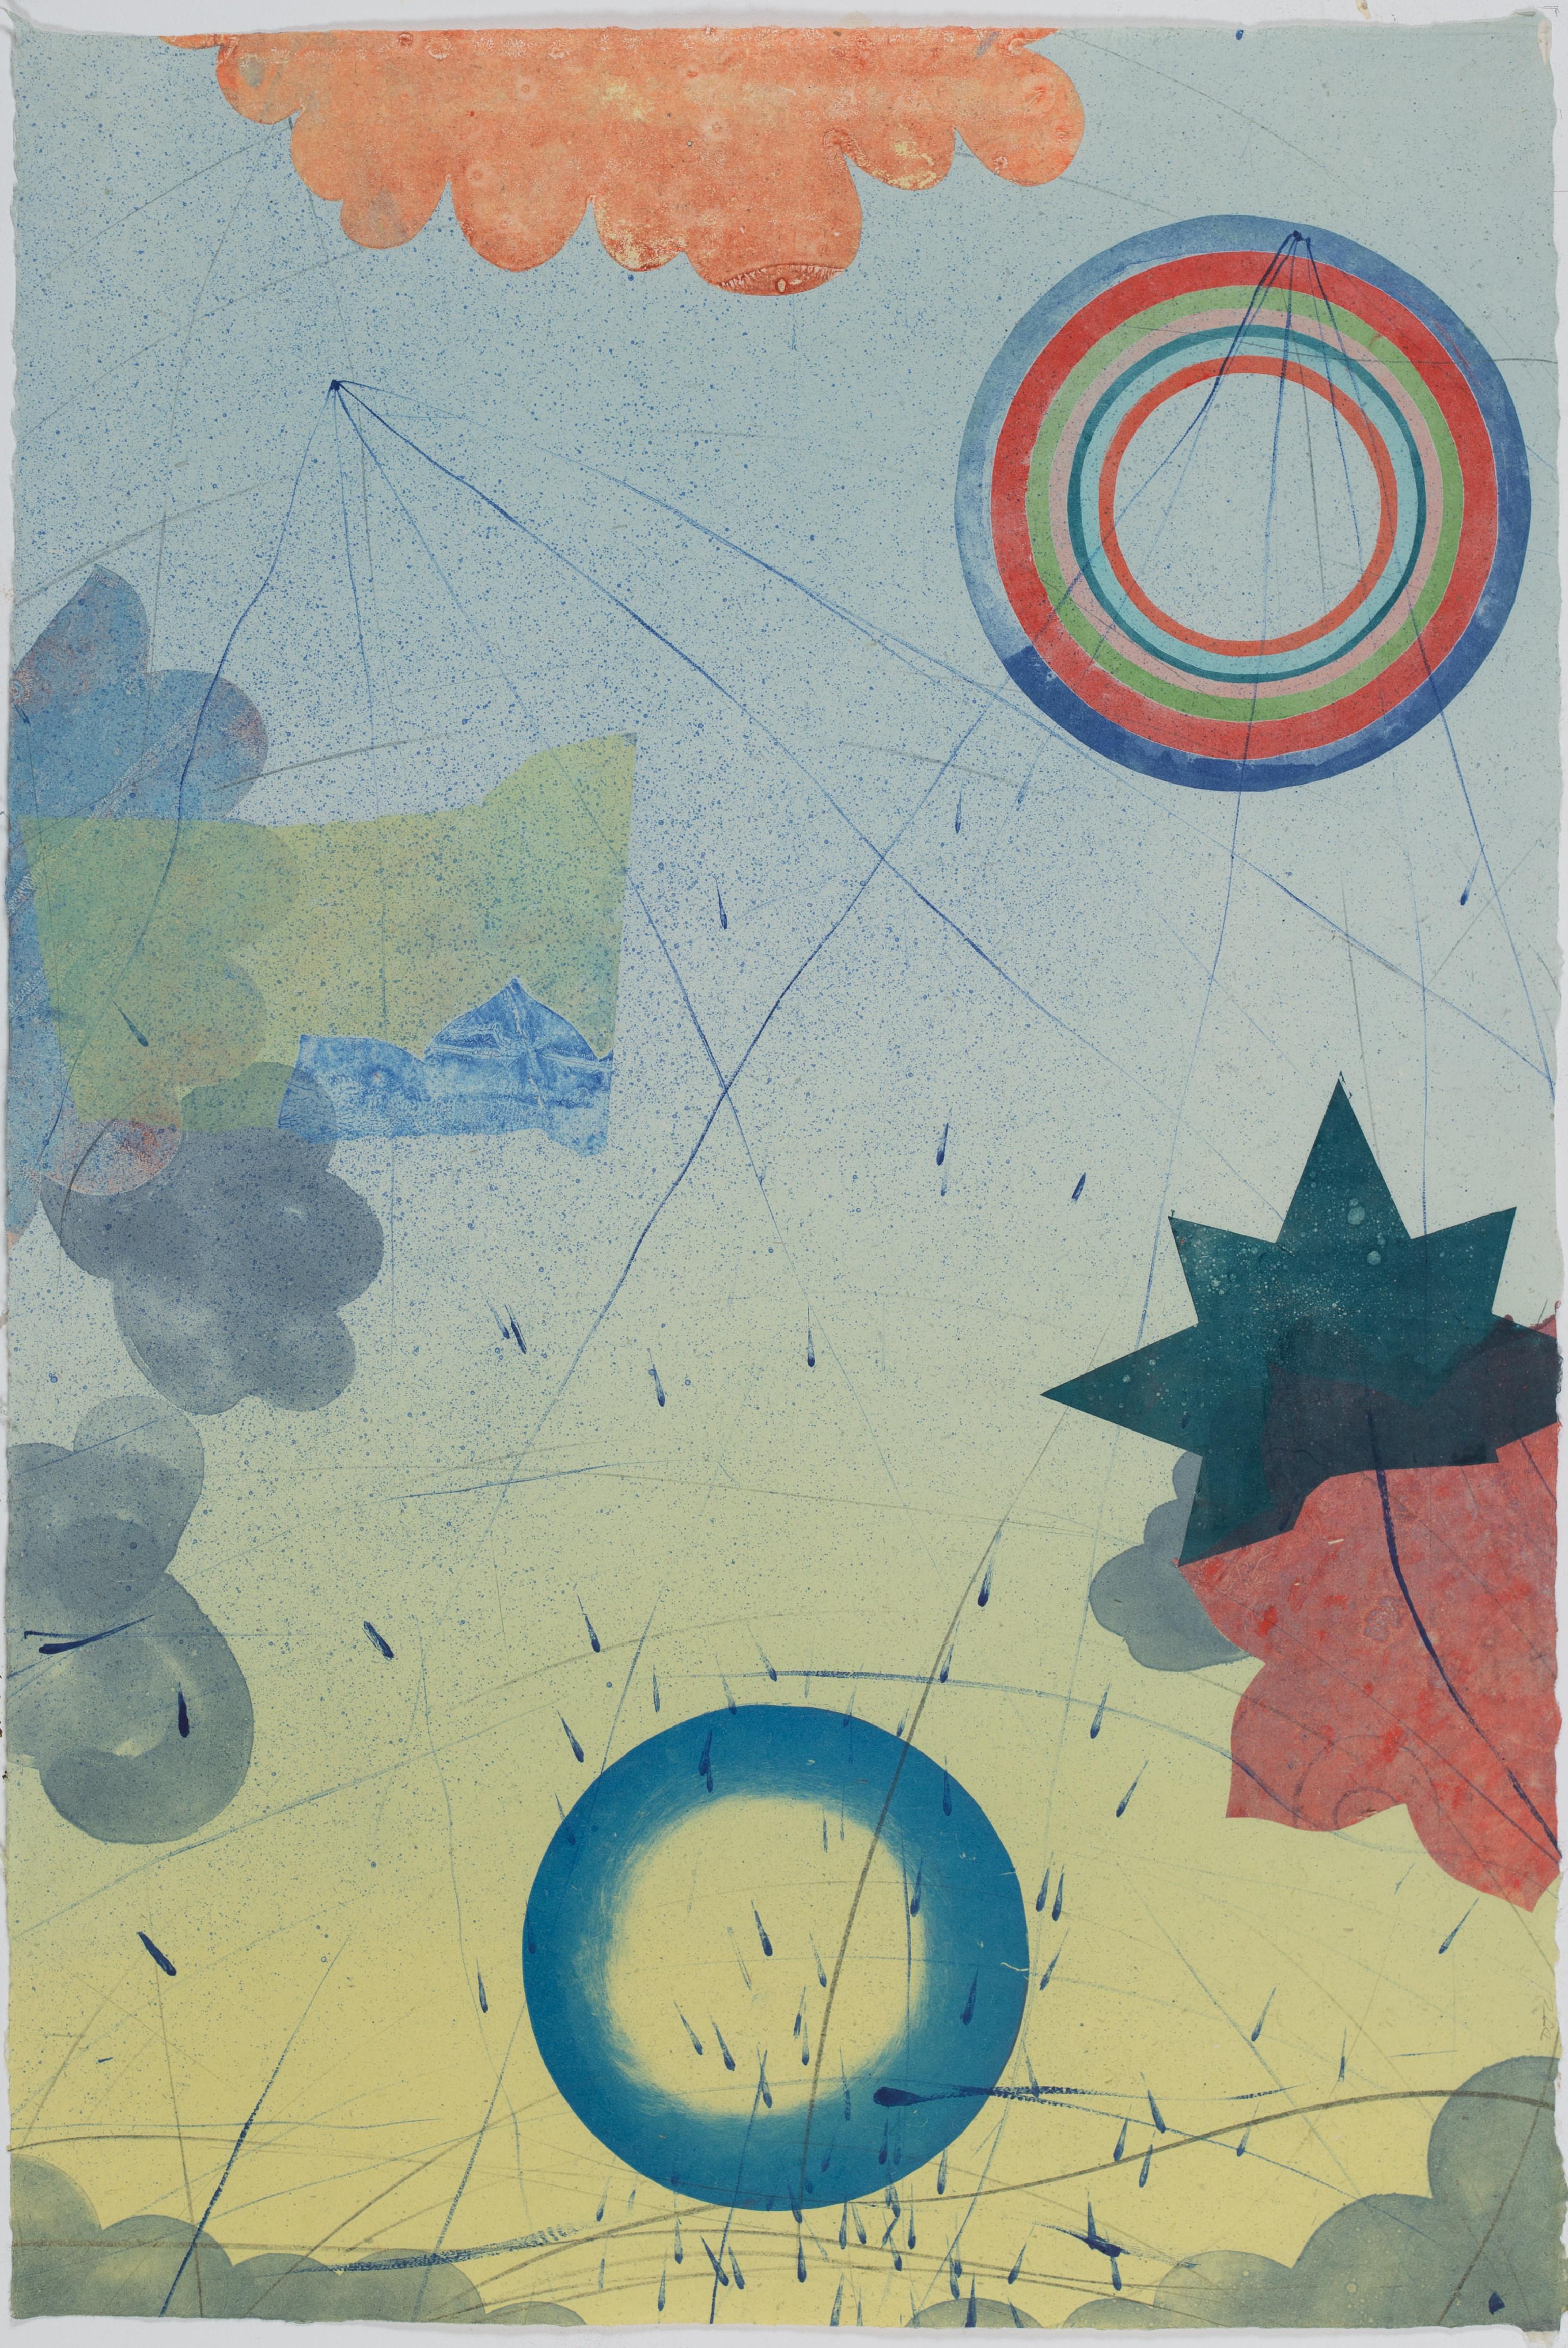 Pilot 22, Vertical Abstract Monotype, Teal Blue, Yellow, Coral, Circles, Stars